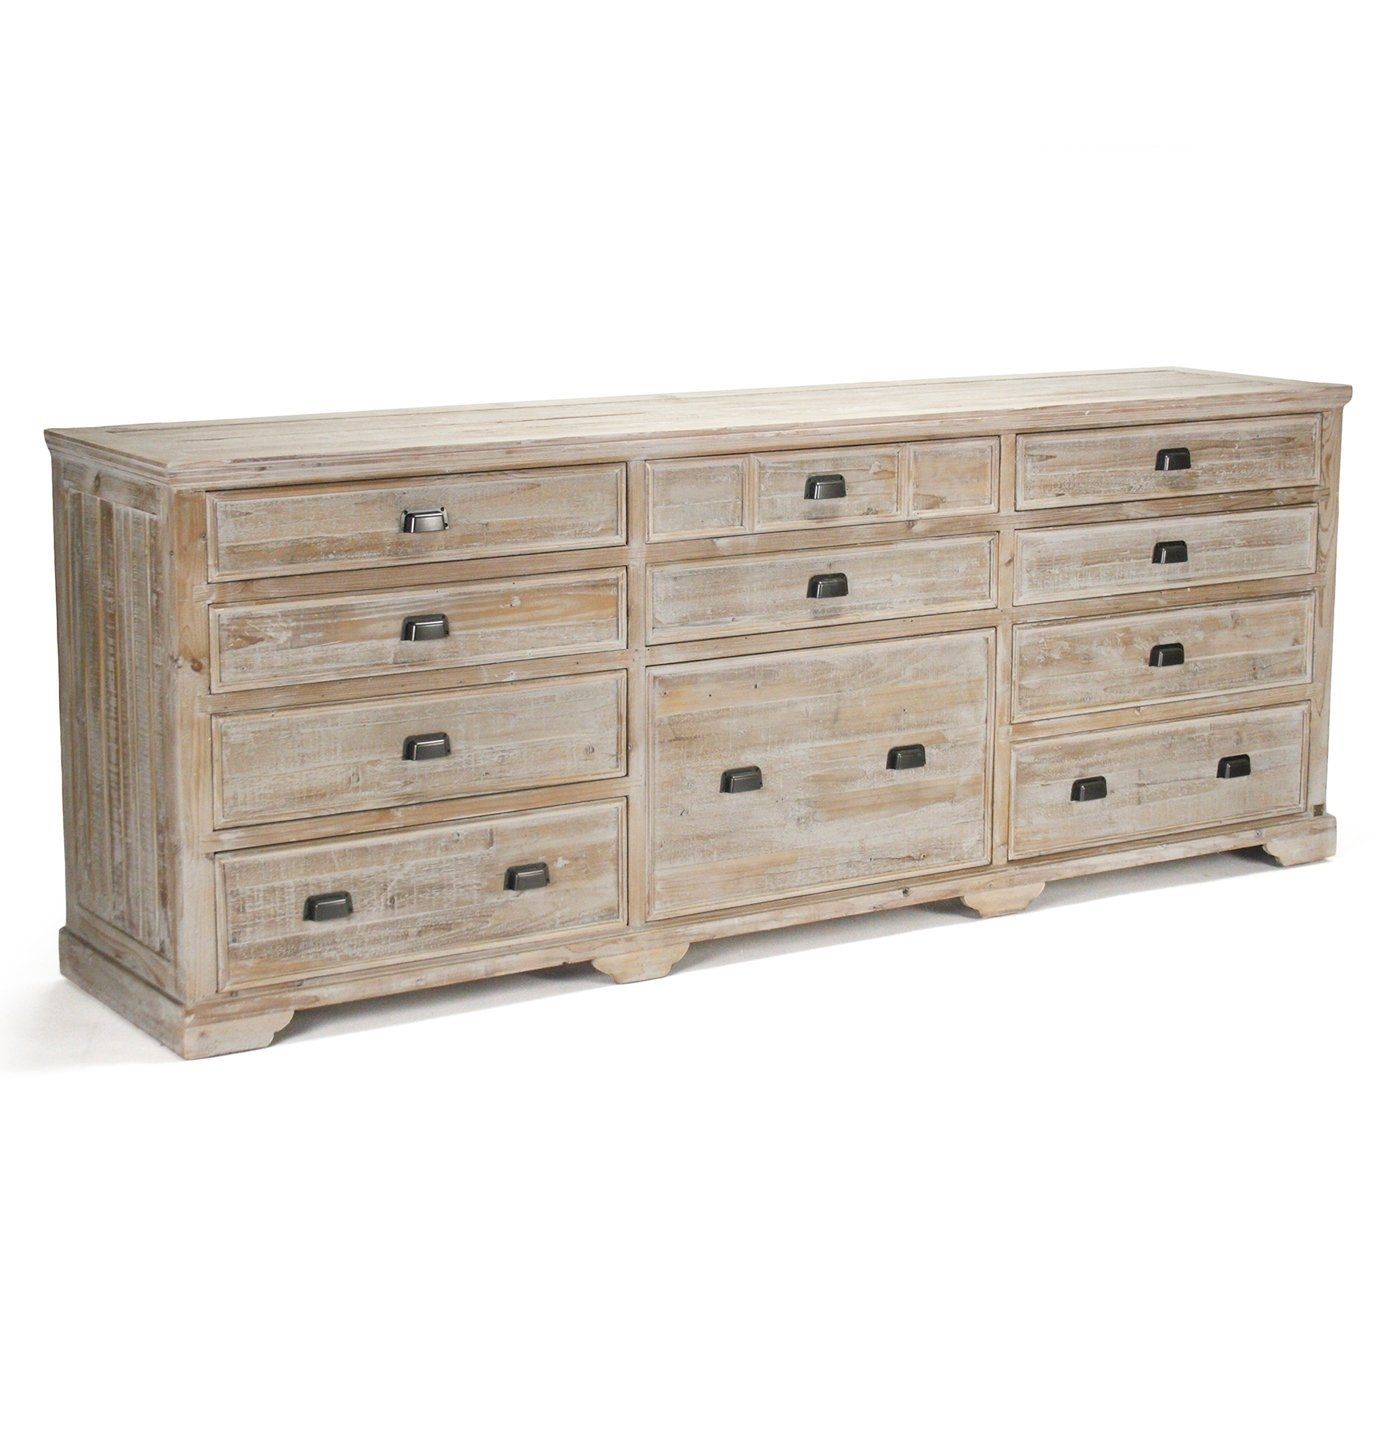 Cheap Reclaimed Sideboard, Find Reclaimed Sideboard Deals On Line At In Recent White Wash 4 Door Galvanized Sideboards (View 3 of 20)